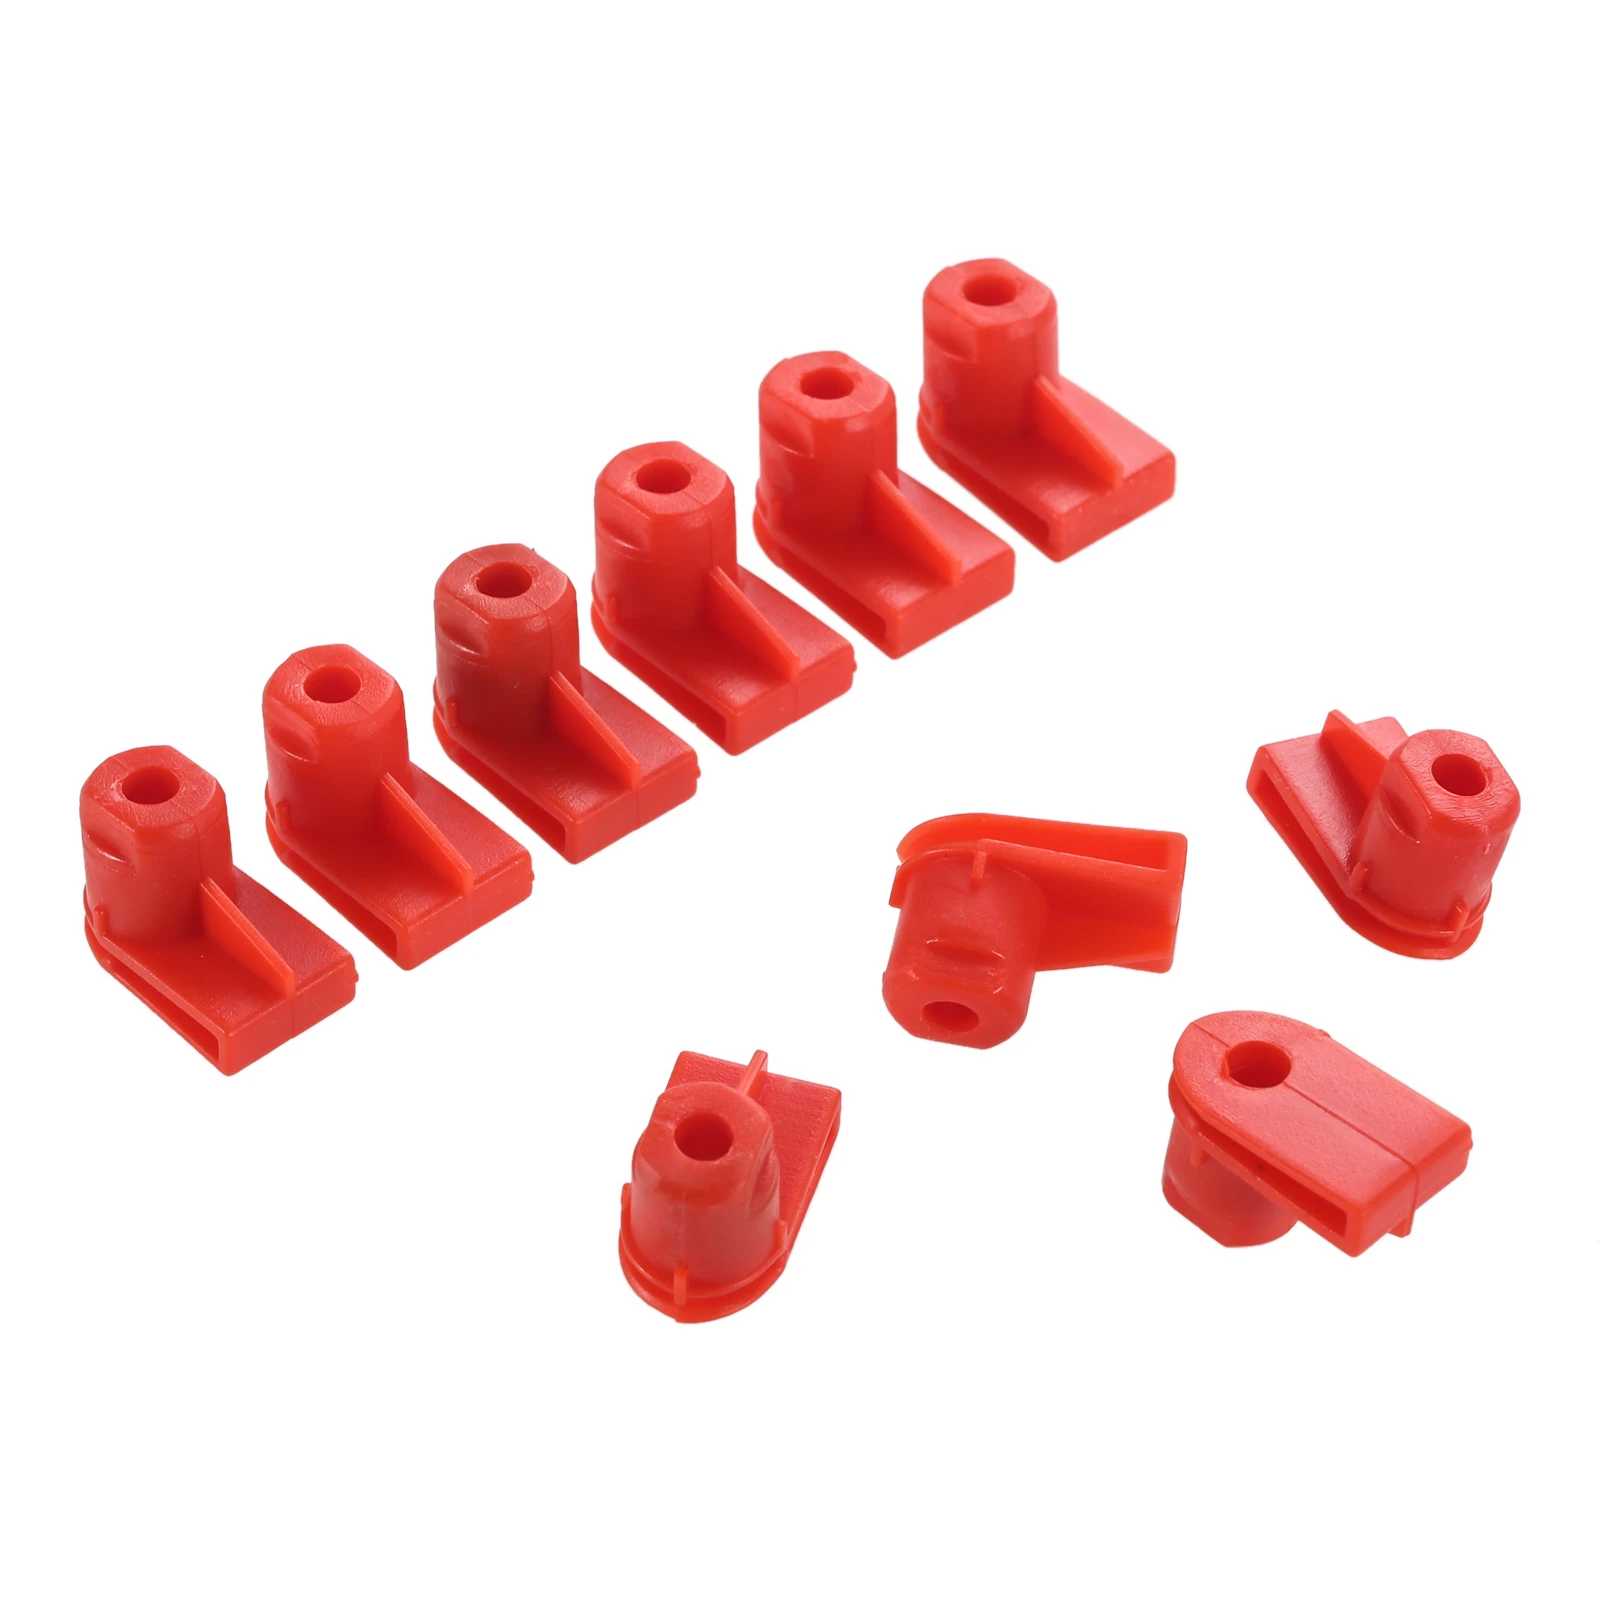 VAUXHALL OPEL PANEL CLIP 8mm Pack of 20